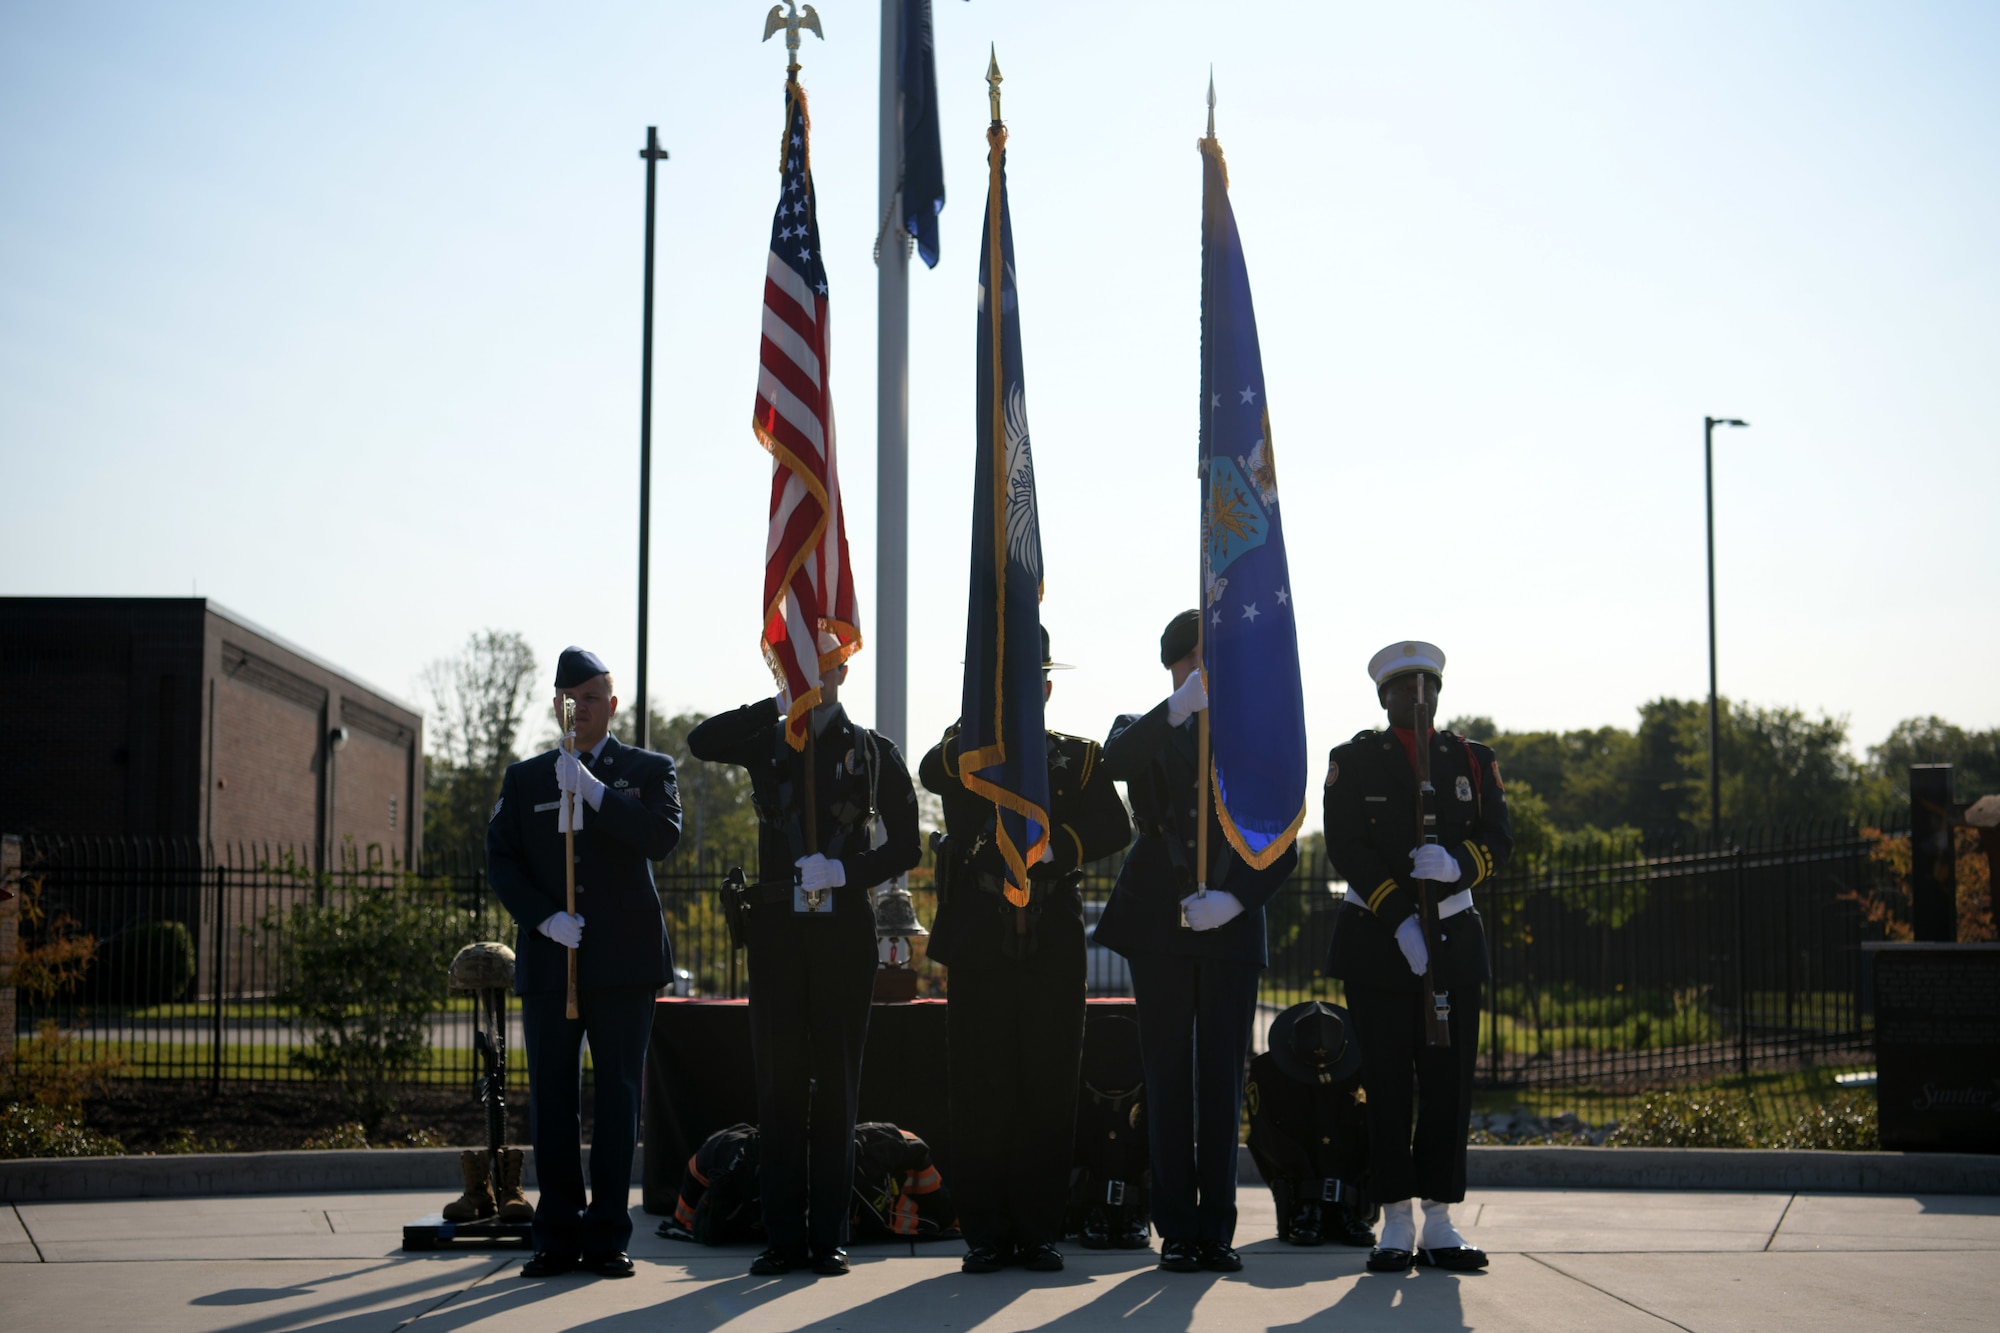 Members of a joint Shaw Air Force Base and Sumter honor guard present the colors as the national anthem is sung during a 9/11 memorial ceremony in Sumter, S.C., Sept. 11, 2021. The ceremony was held in remembrance of the 20th anniversary of the Sept. 11, 2001, attacks across the United States. (U.S. Air Force photo by Staff Sgt. K. Tucker Owen)